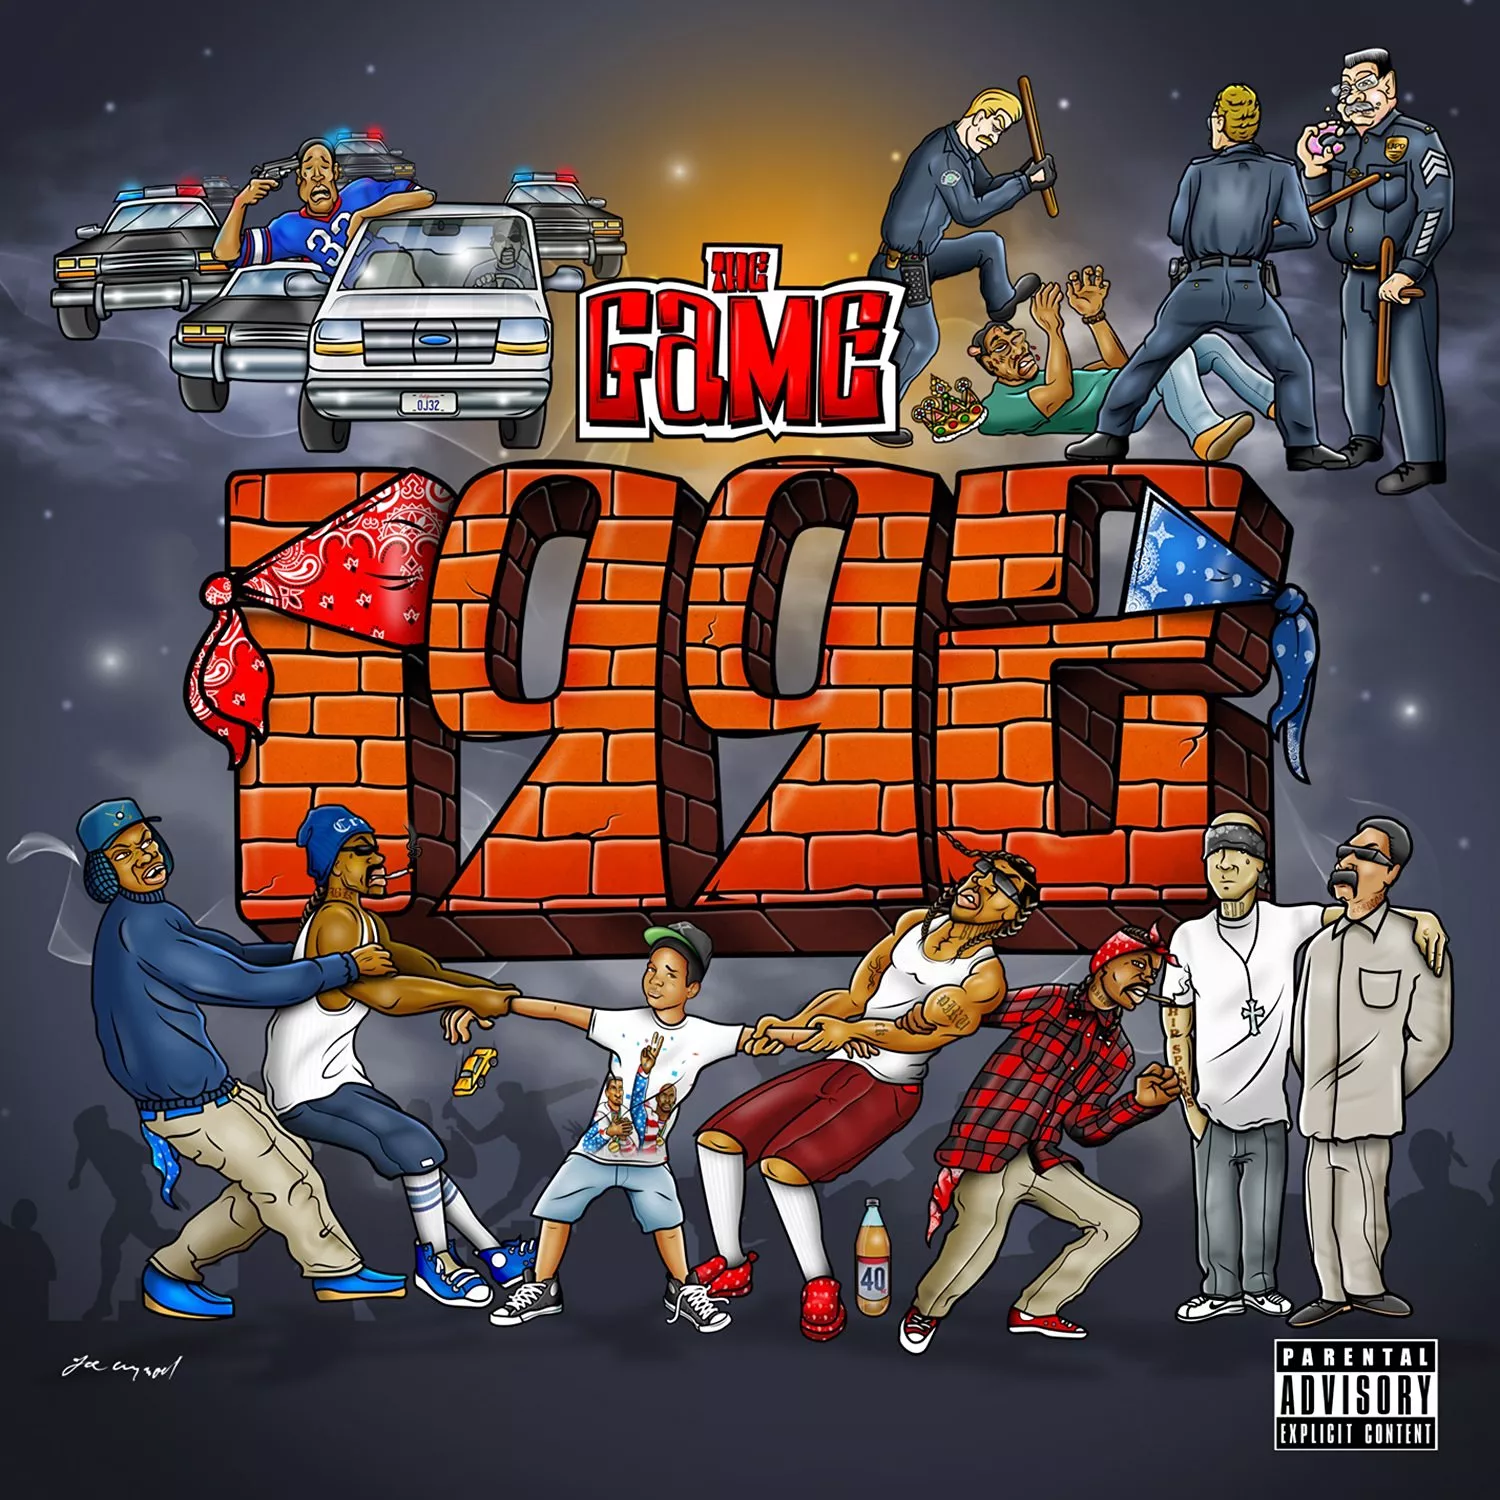 1992 - The Game